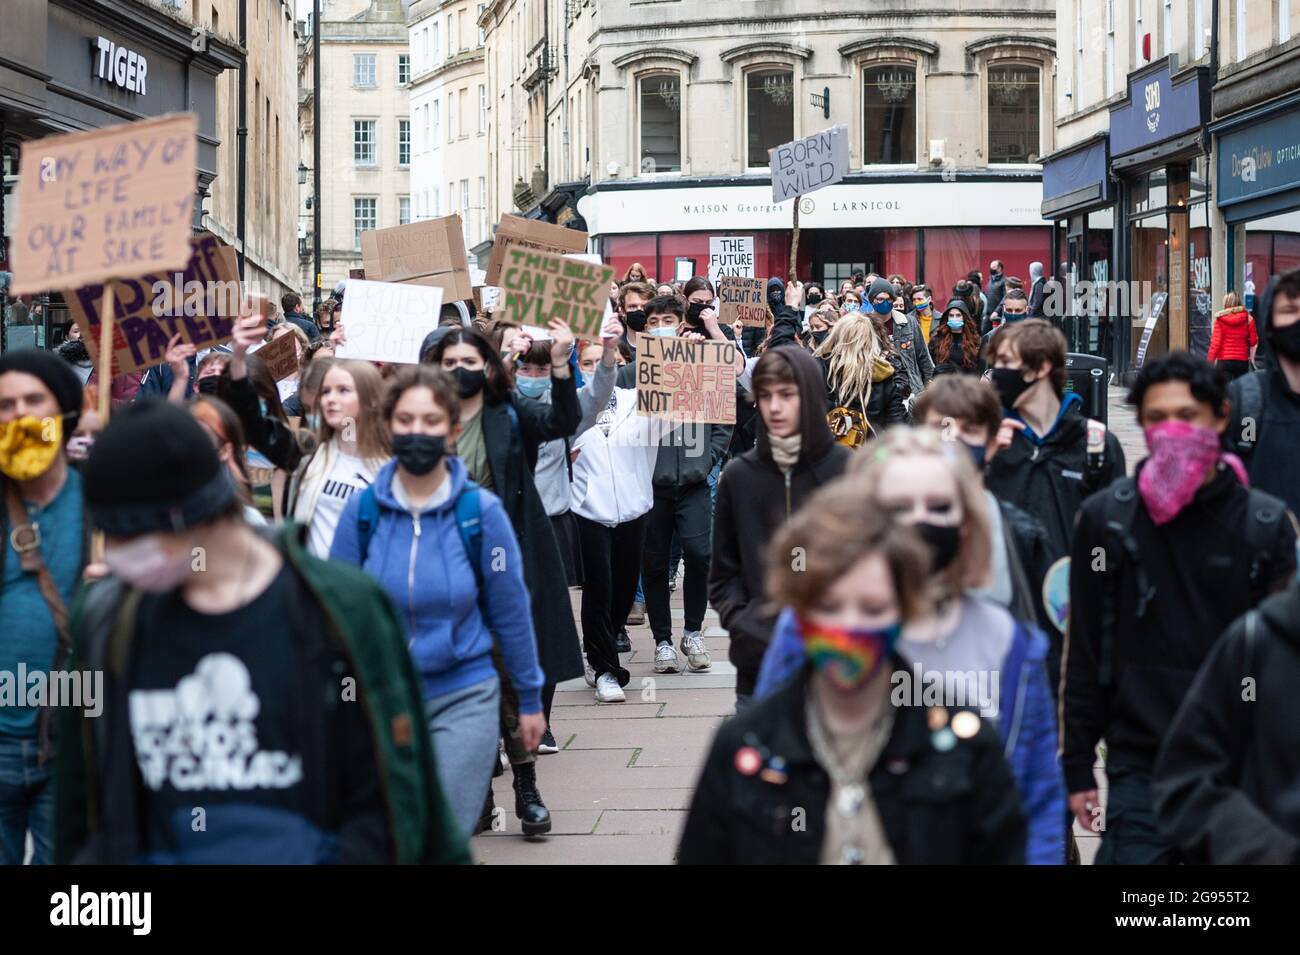 Bath, UK. 27th March 2021. Approximately 200 mostly young protesters took to the streets of historic Bath in North Somerset to demonstrate against the Stock Photo